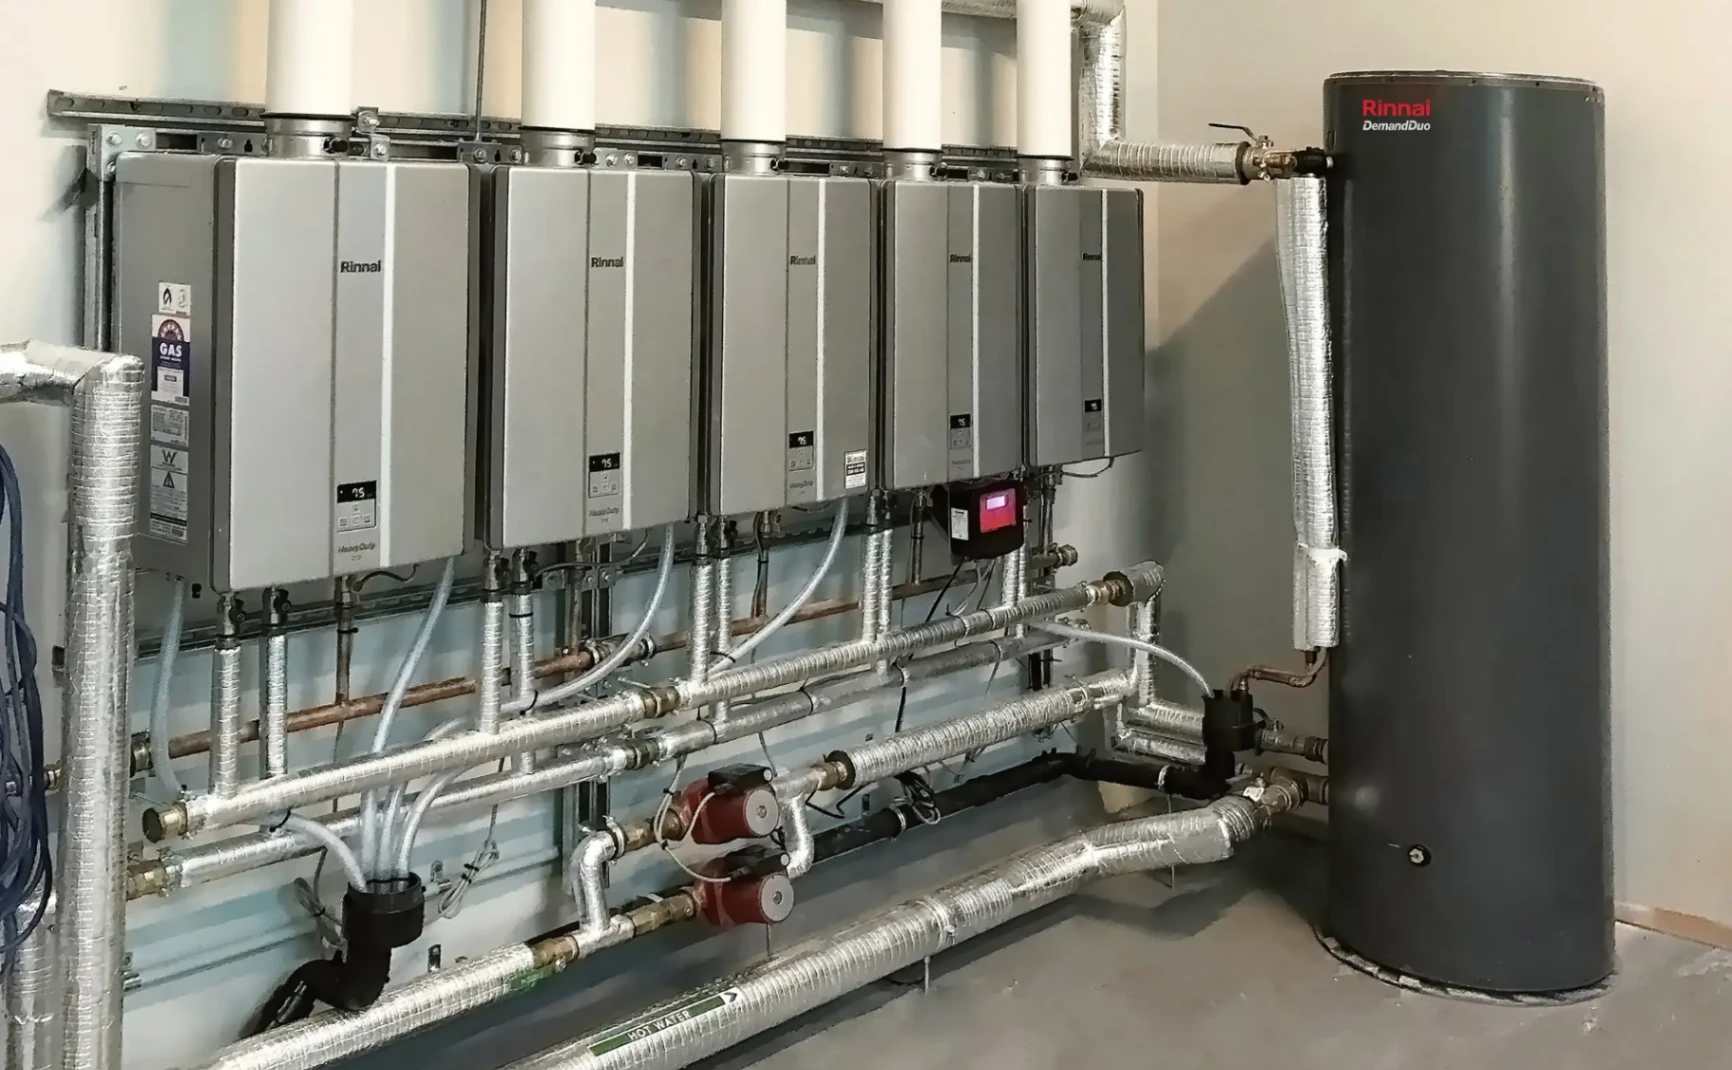 Rinnai commercial gas hot water system with 4 systems and commercial flue